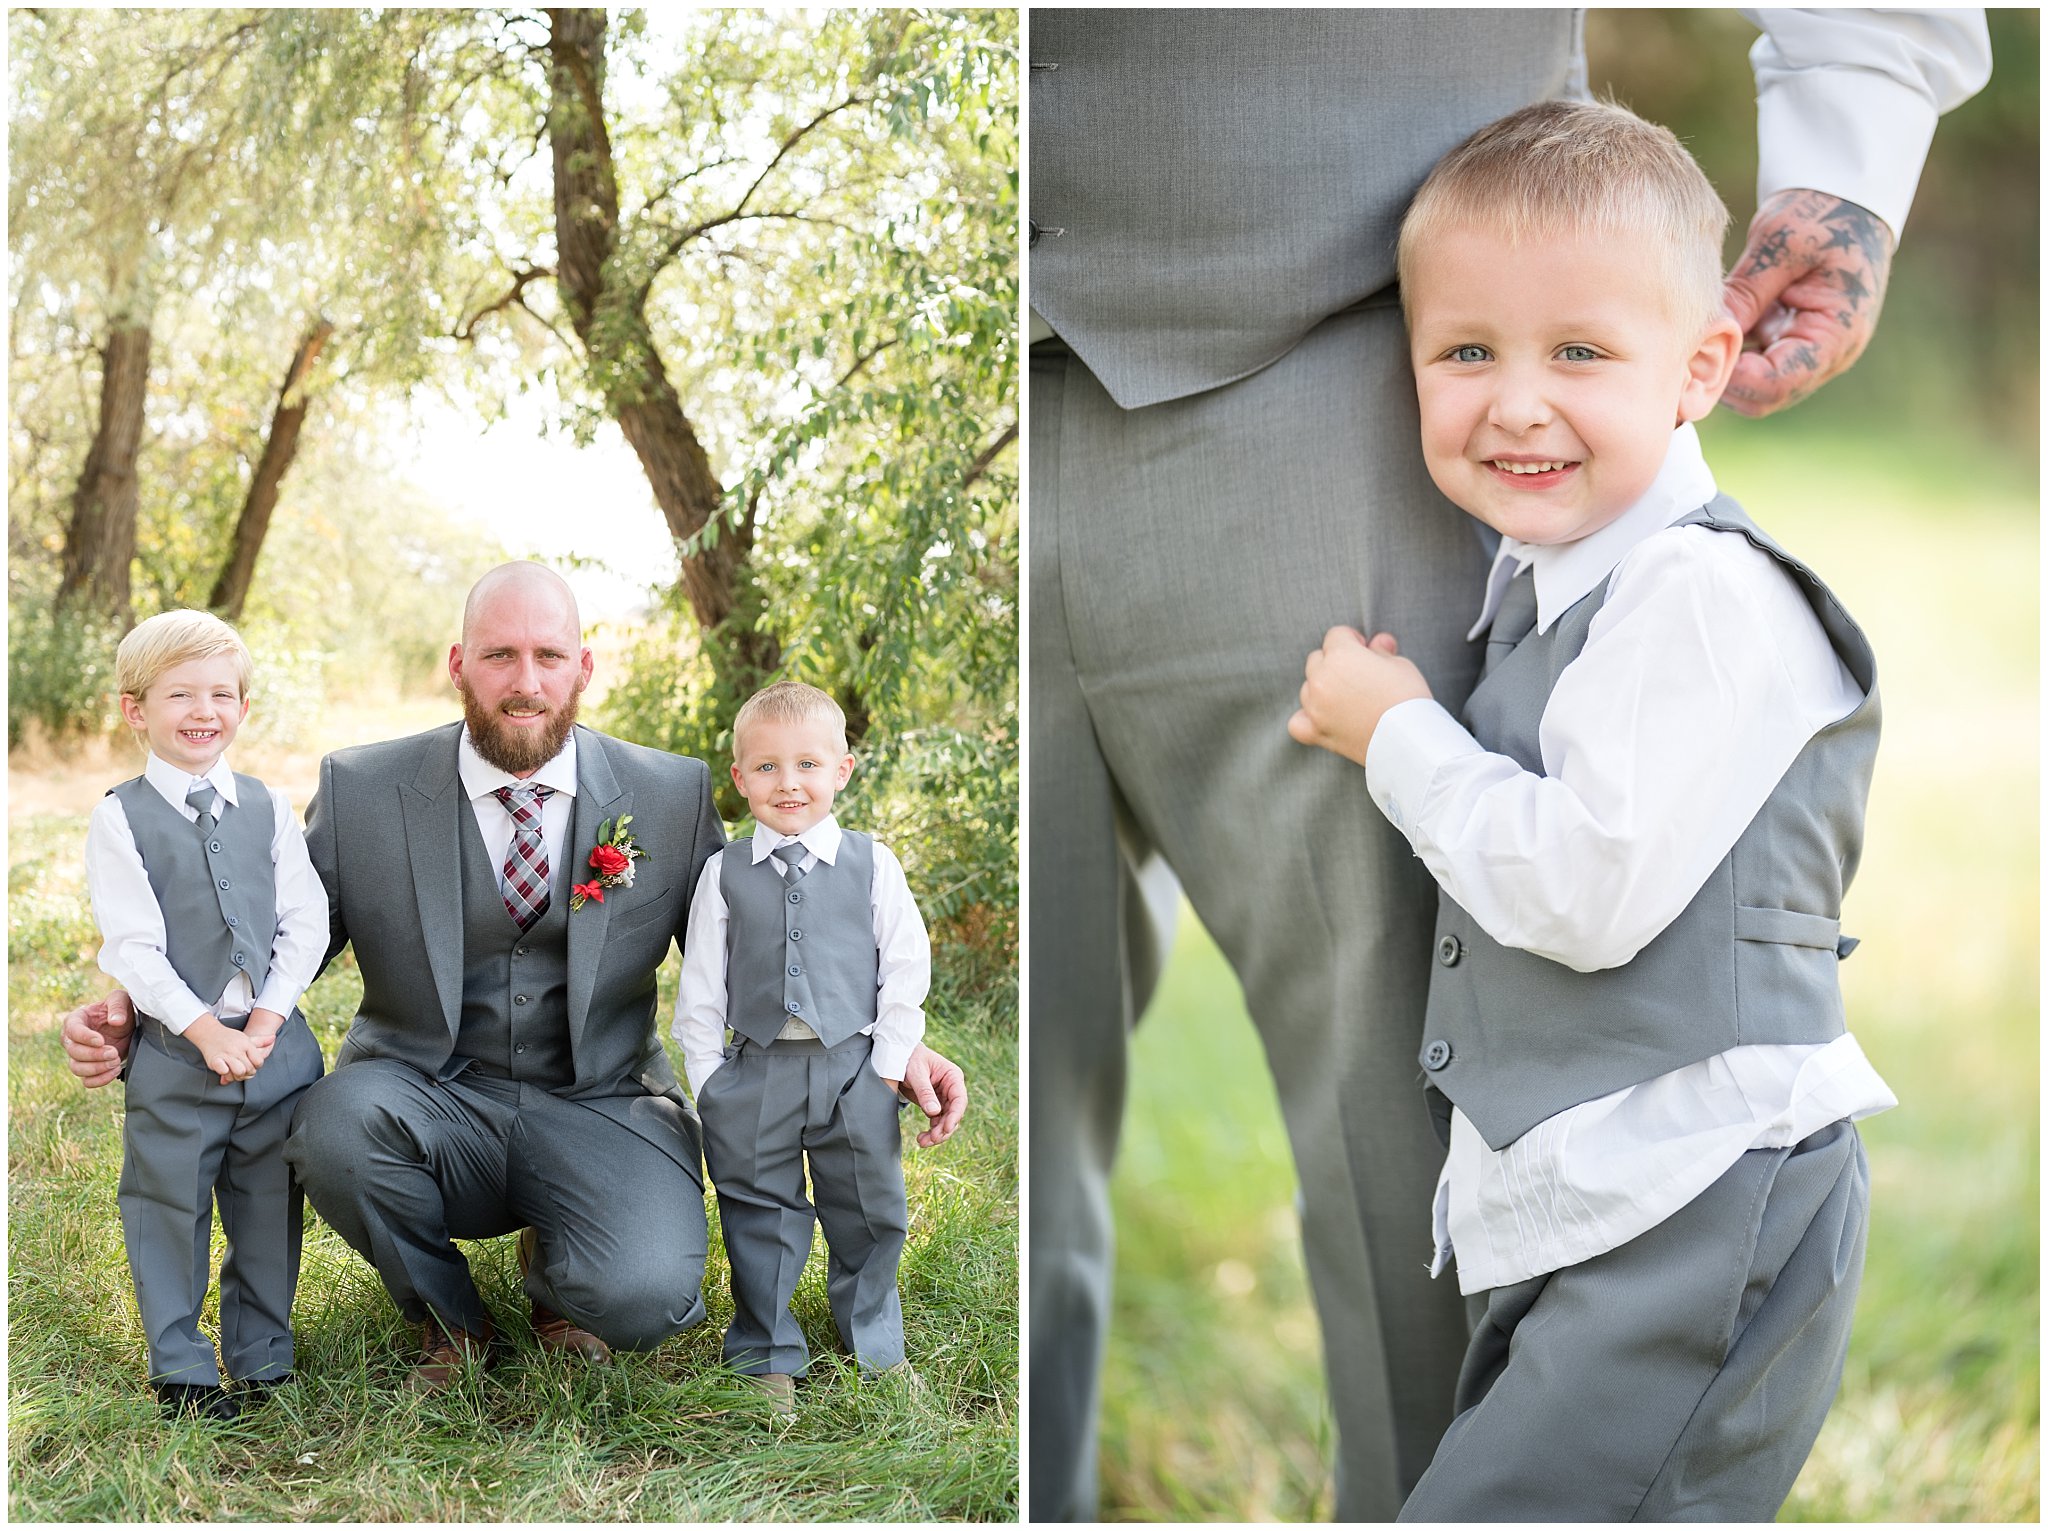 Red and white outdoor wedding | Groom and ring bearers | Davis County Outdoor Wedding | Jessie and Dallin Photography